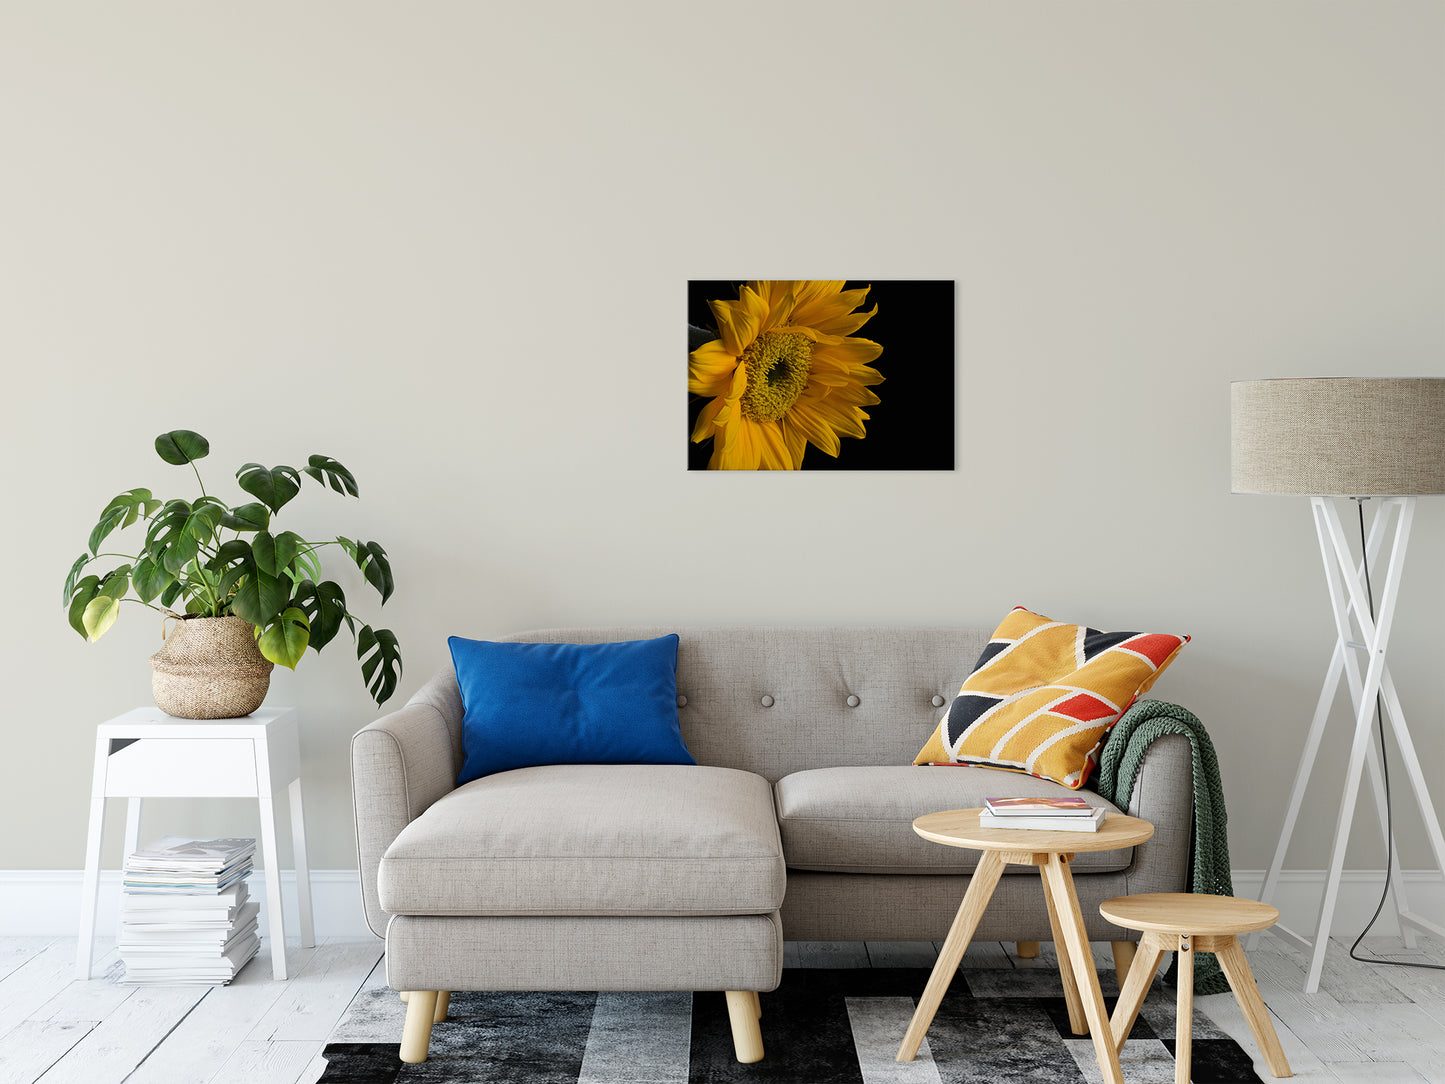 Sunflower from Left Nature / Floral Photo Fine Art Canvas Wall Art Prints 20" x 24" - PIPAFINEART